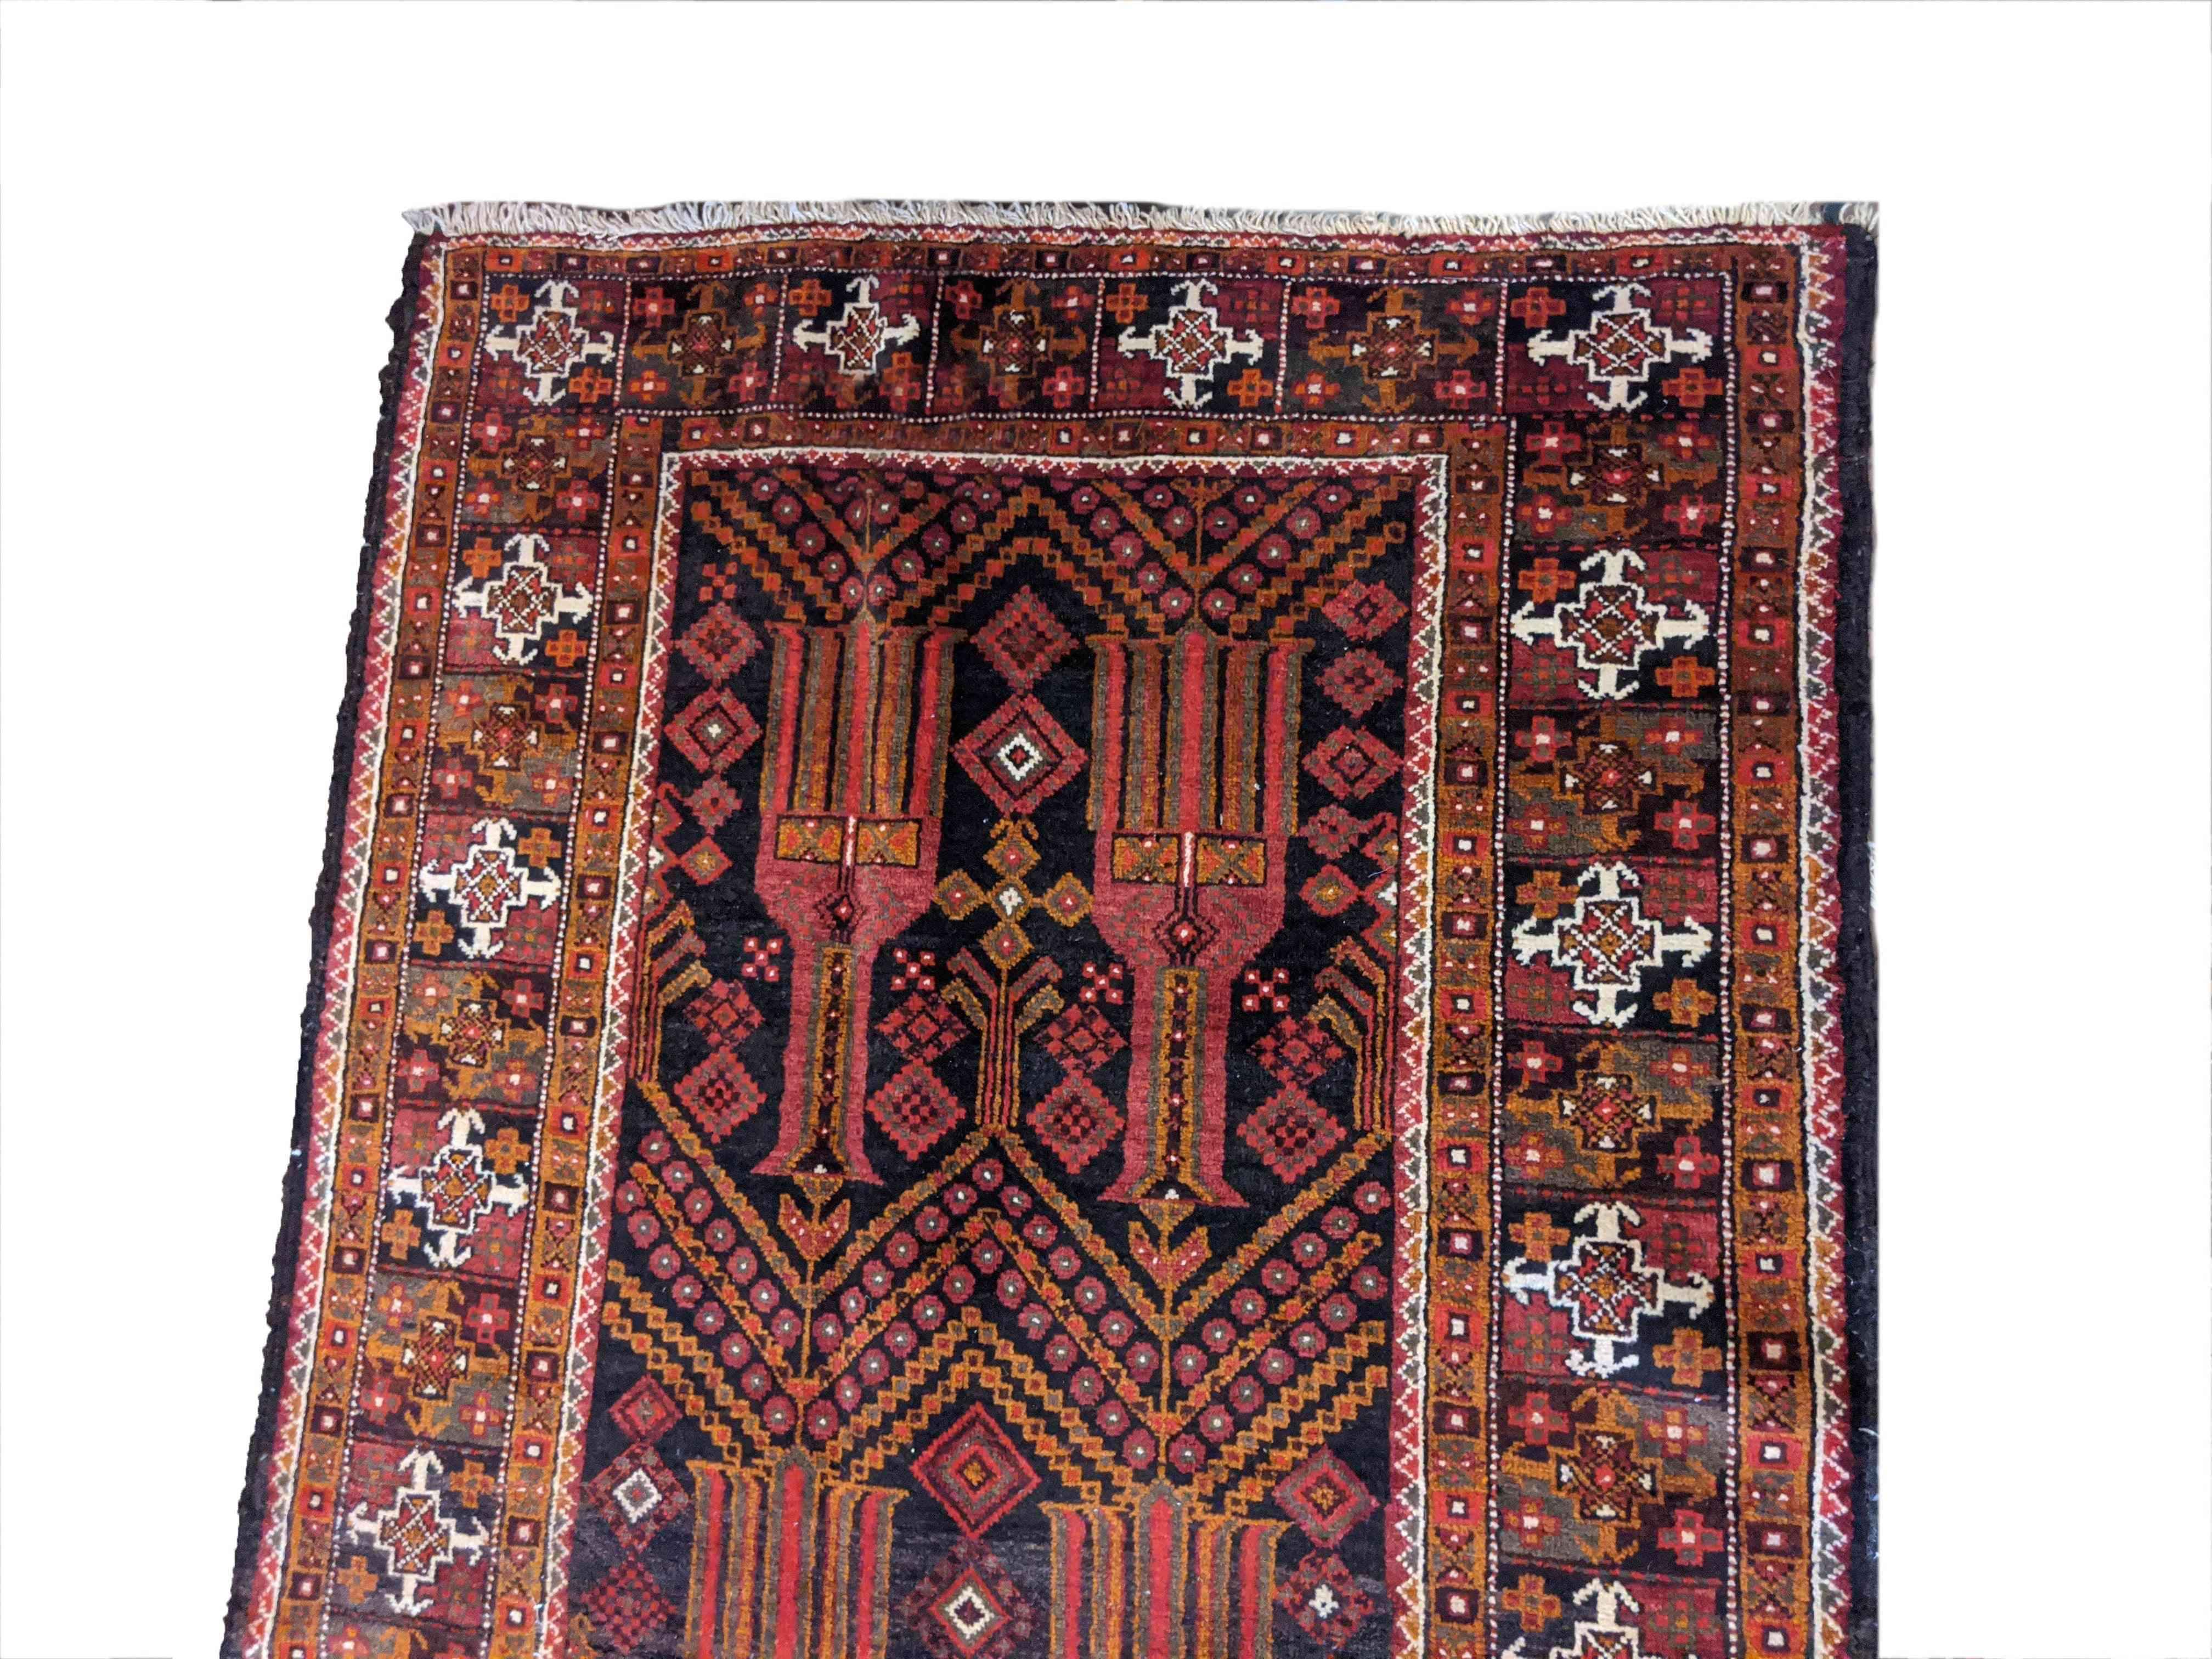 283 x 123 cm Persian Baluch Tribal Red Large Rug - Rugmaster